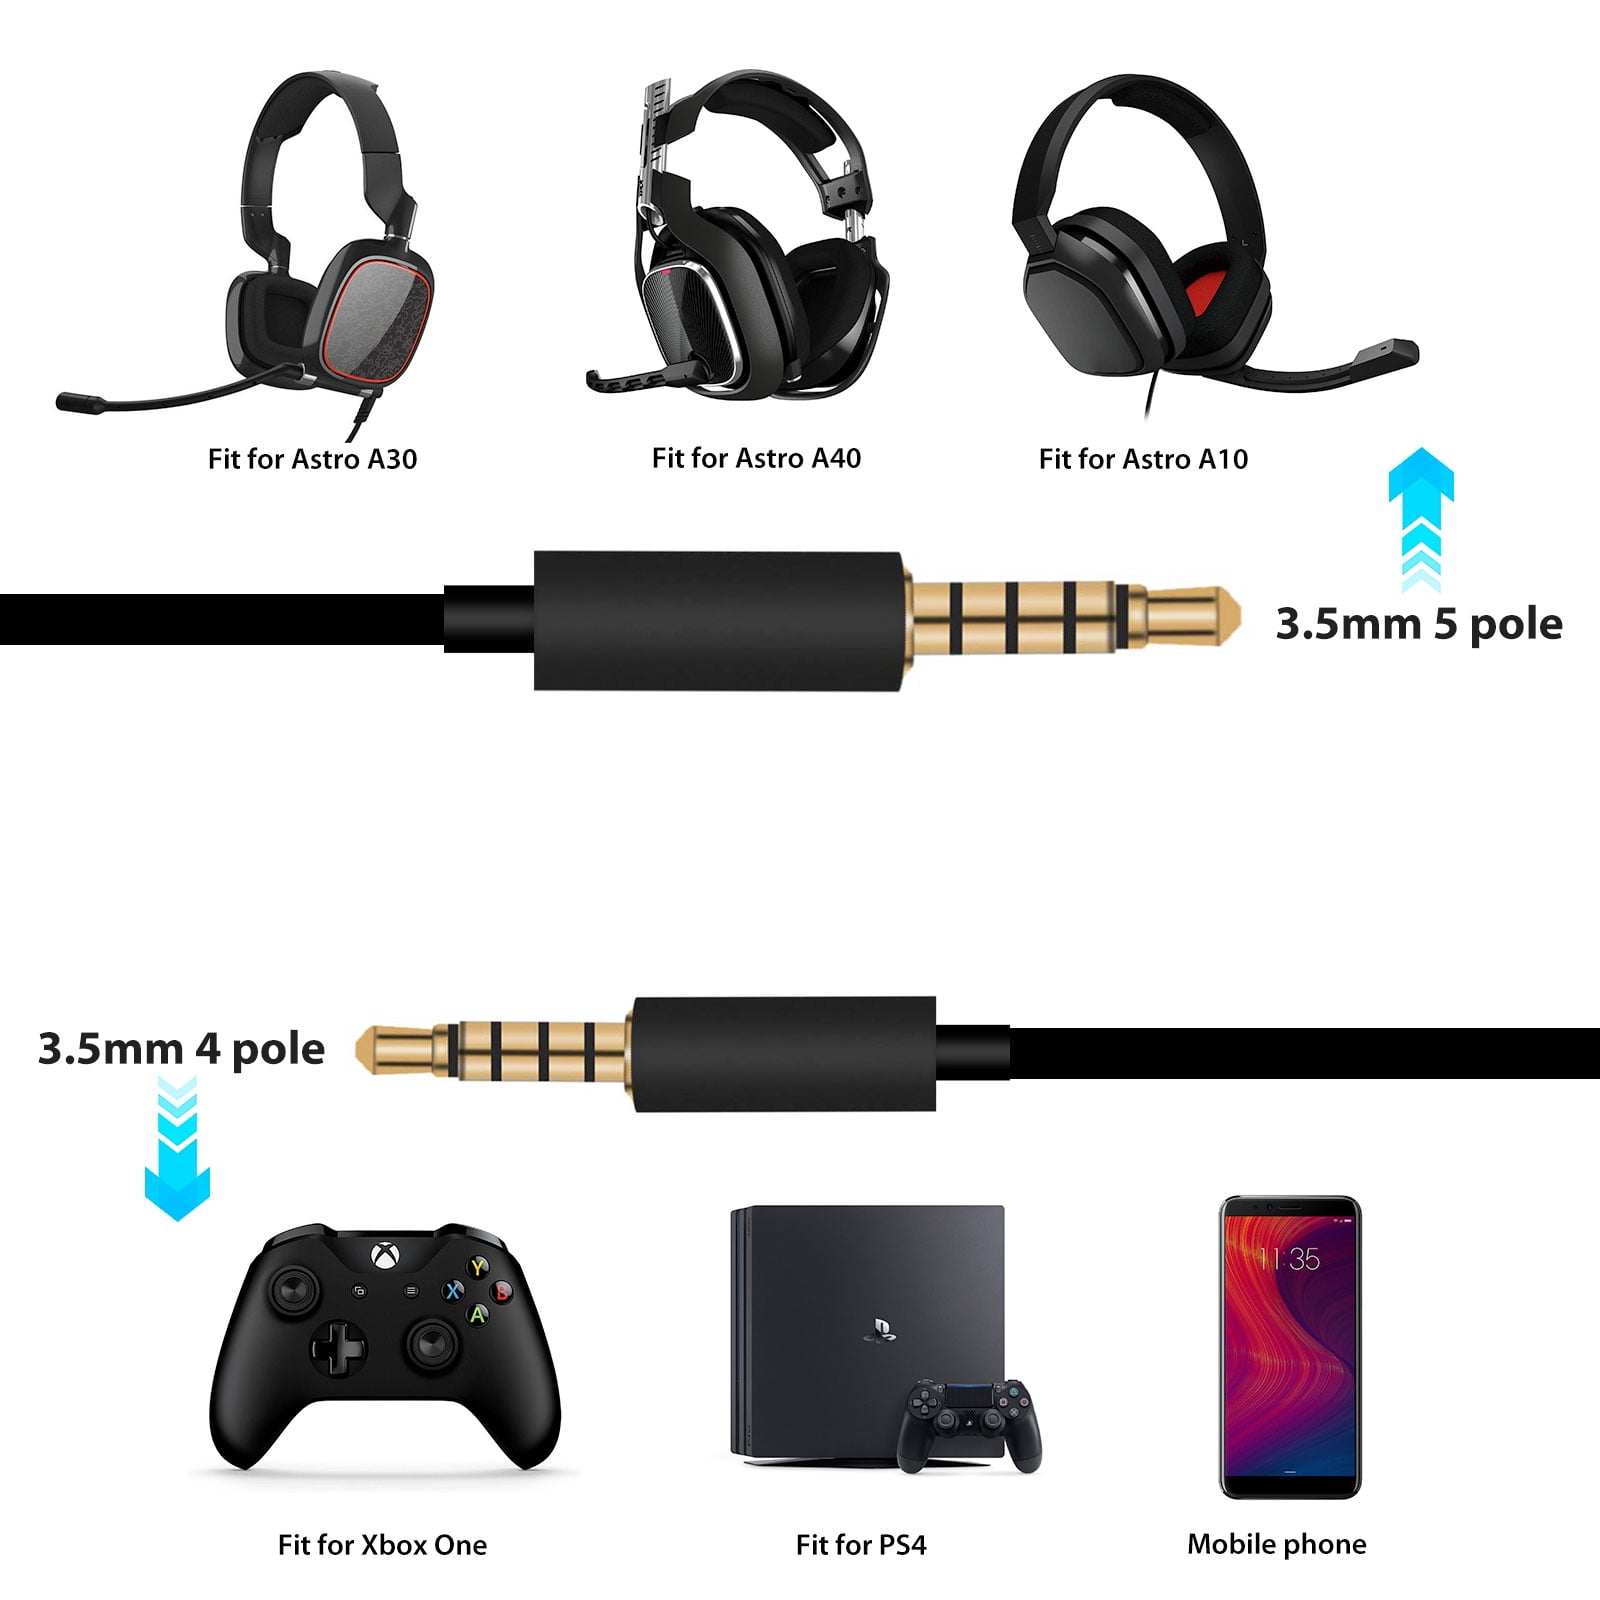 Eeekit For Astro A10 0 Gaming Headset Replacement Audio Cable Cord 3 5mm Audio Talkback Chat Cable Cord Compatible For Xbox One Ps4 And Pc Gaming Walmart Com Walmart Com